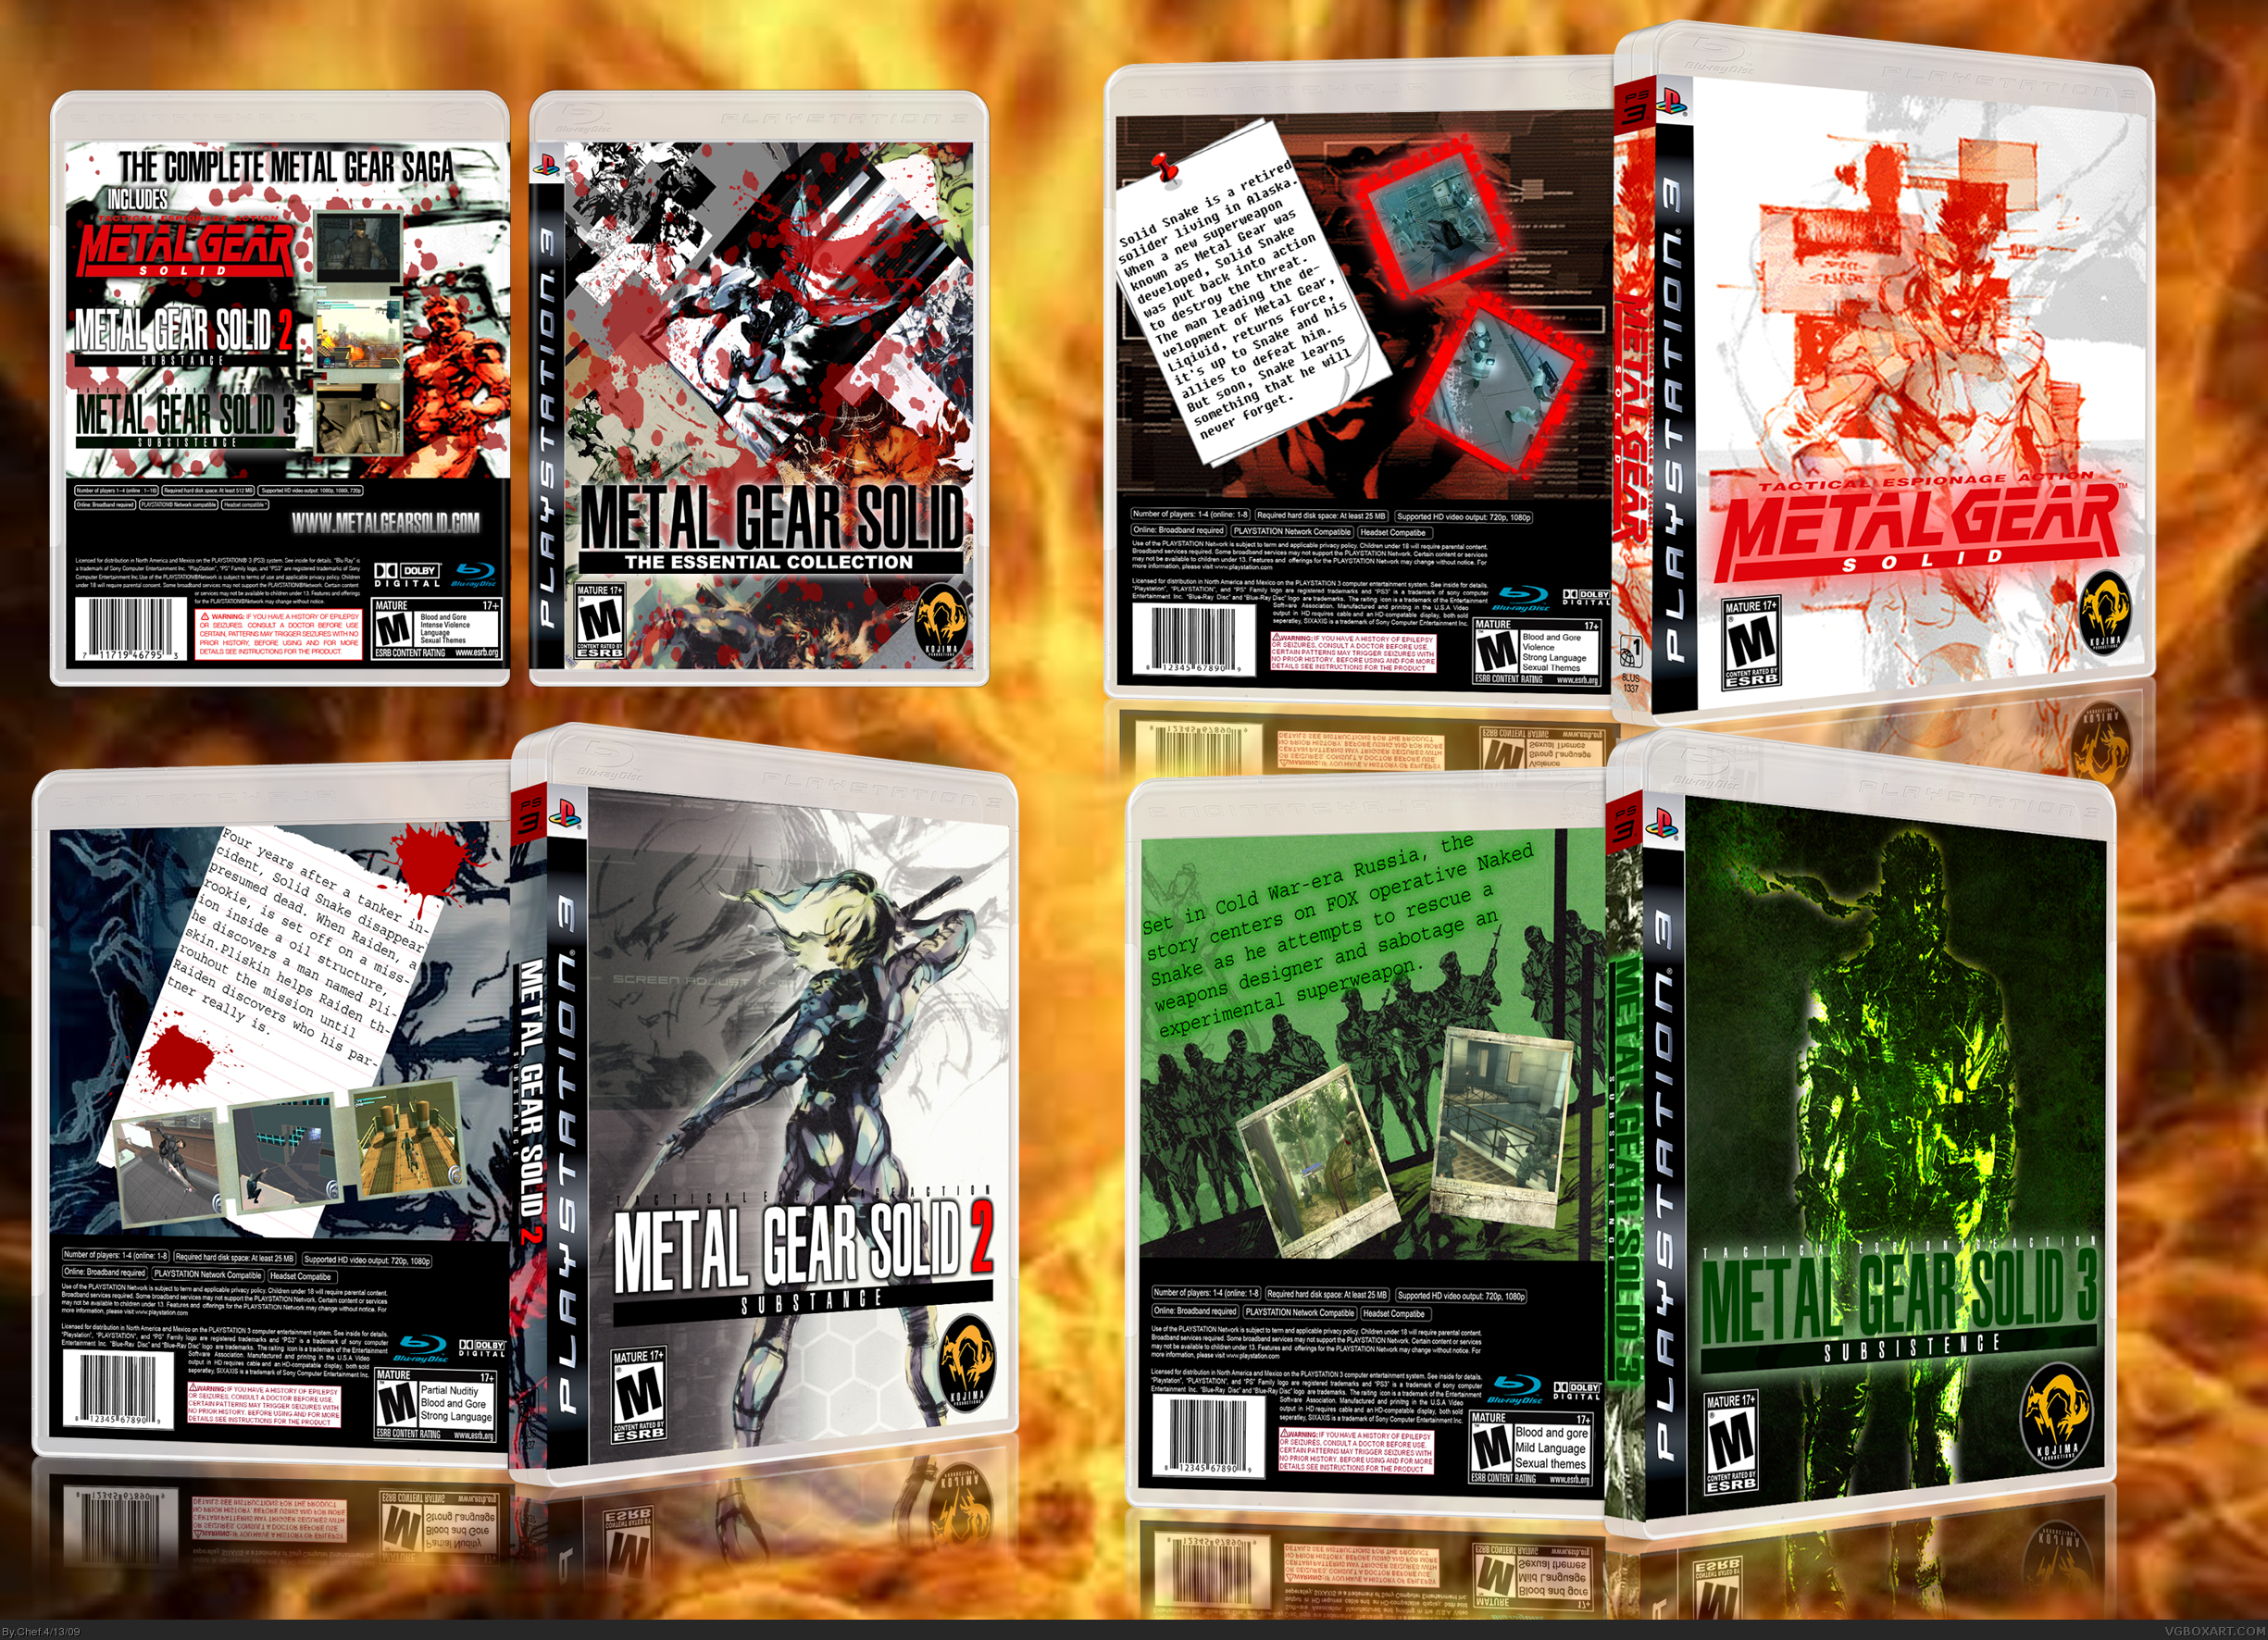 Metal Gear Solid: The Essential Collection box cover